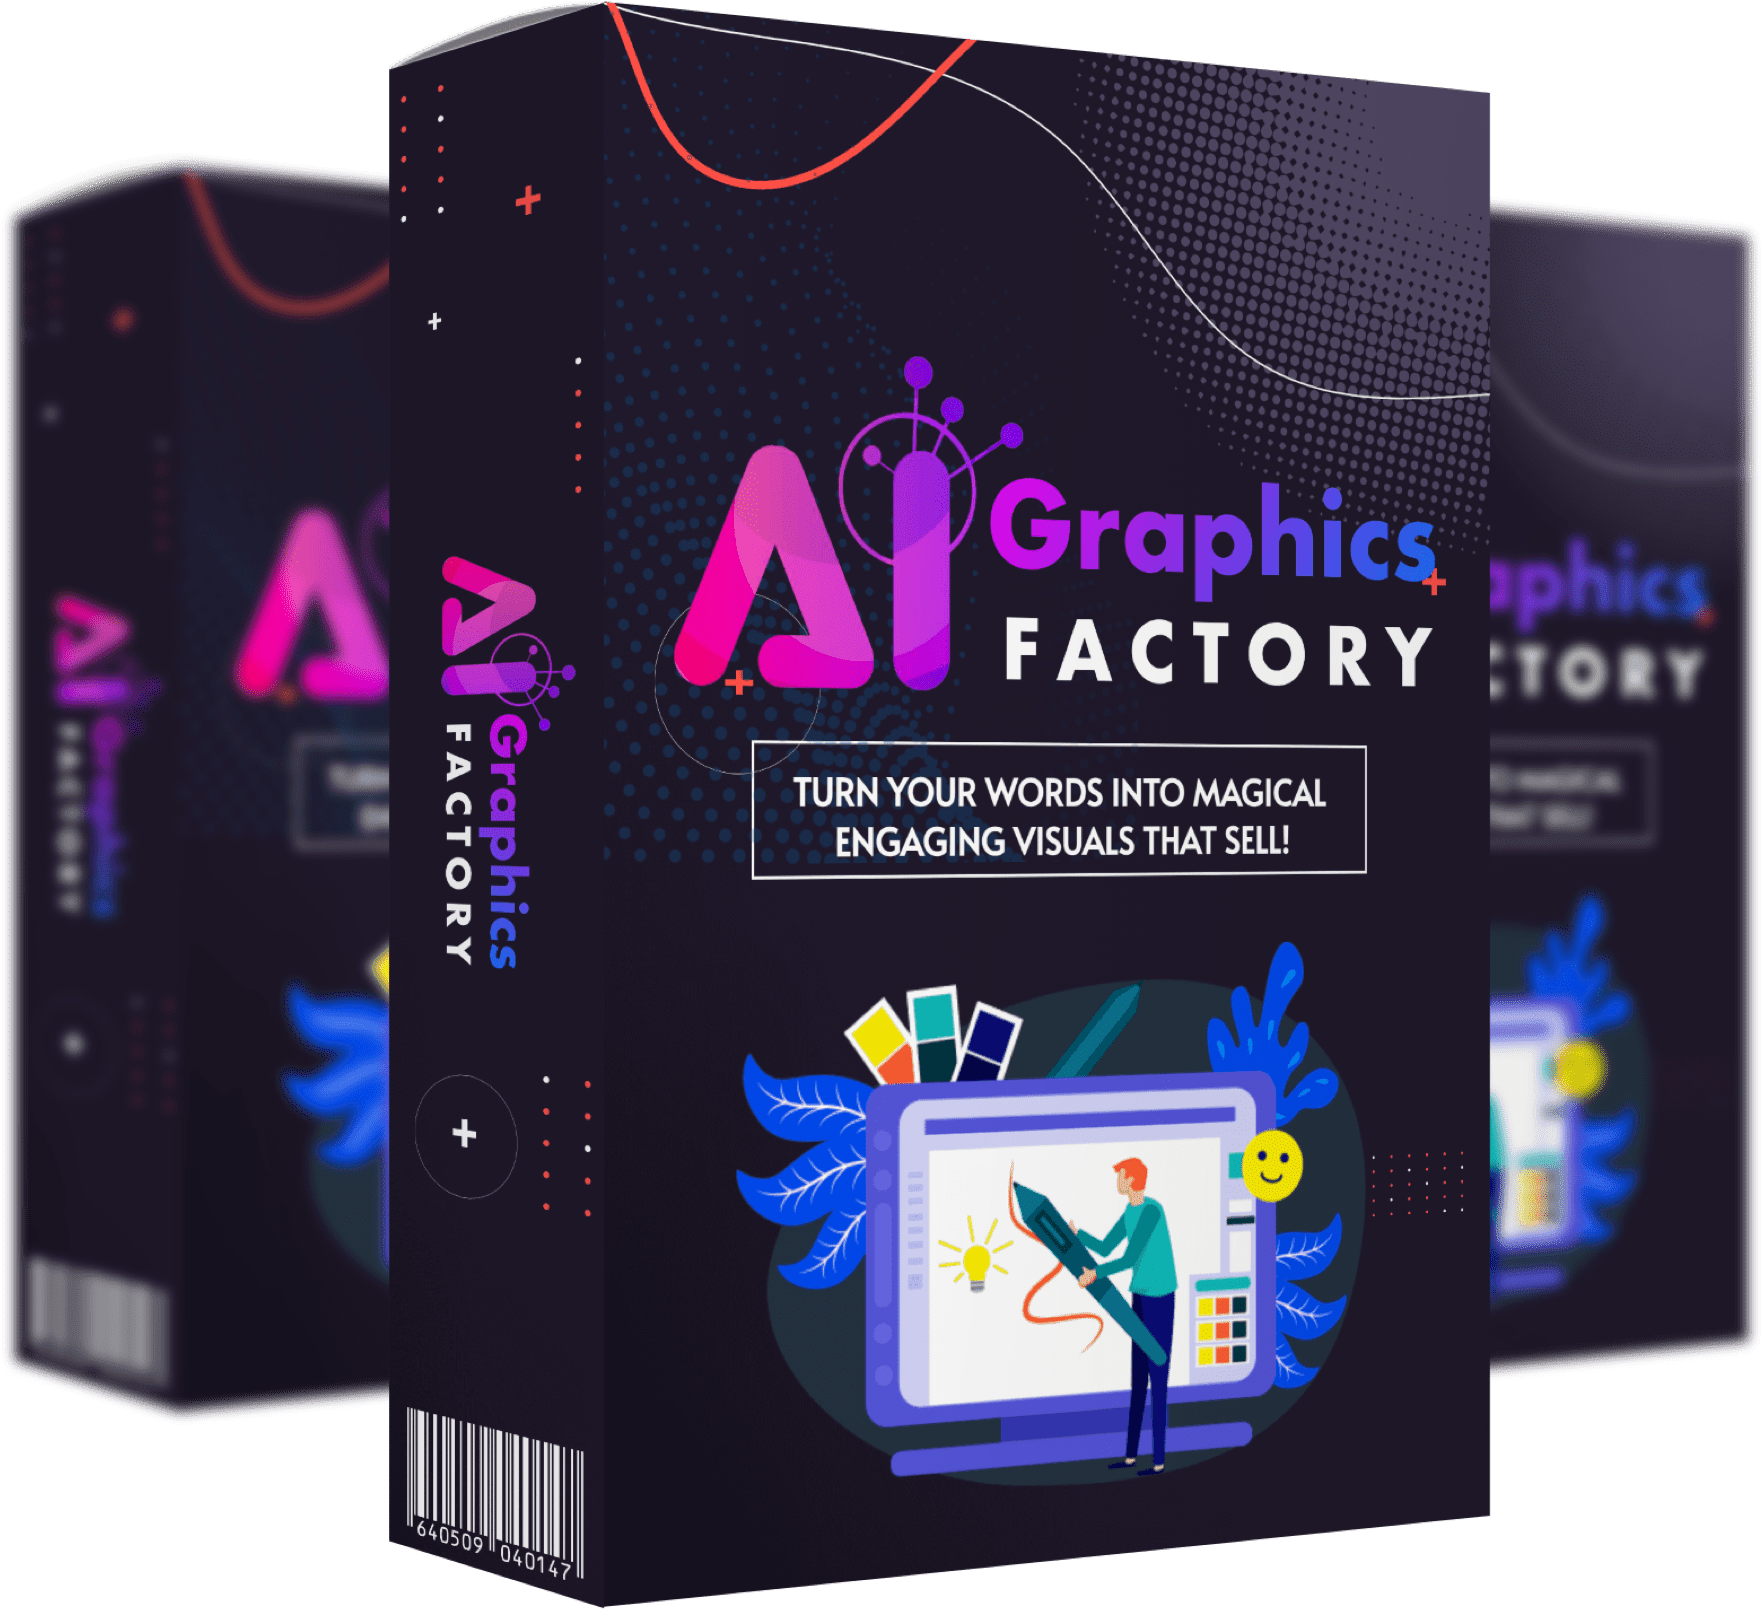 AI Graphics Factory | GRAPHICS THAT SELL INSTANTLY